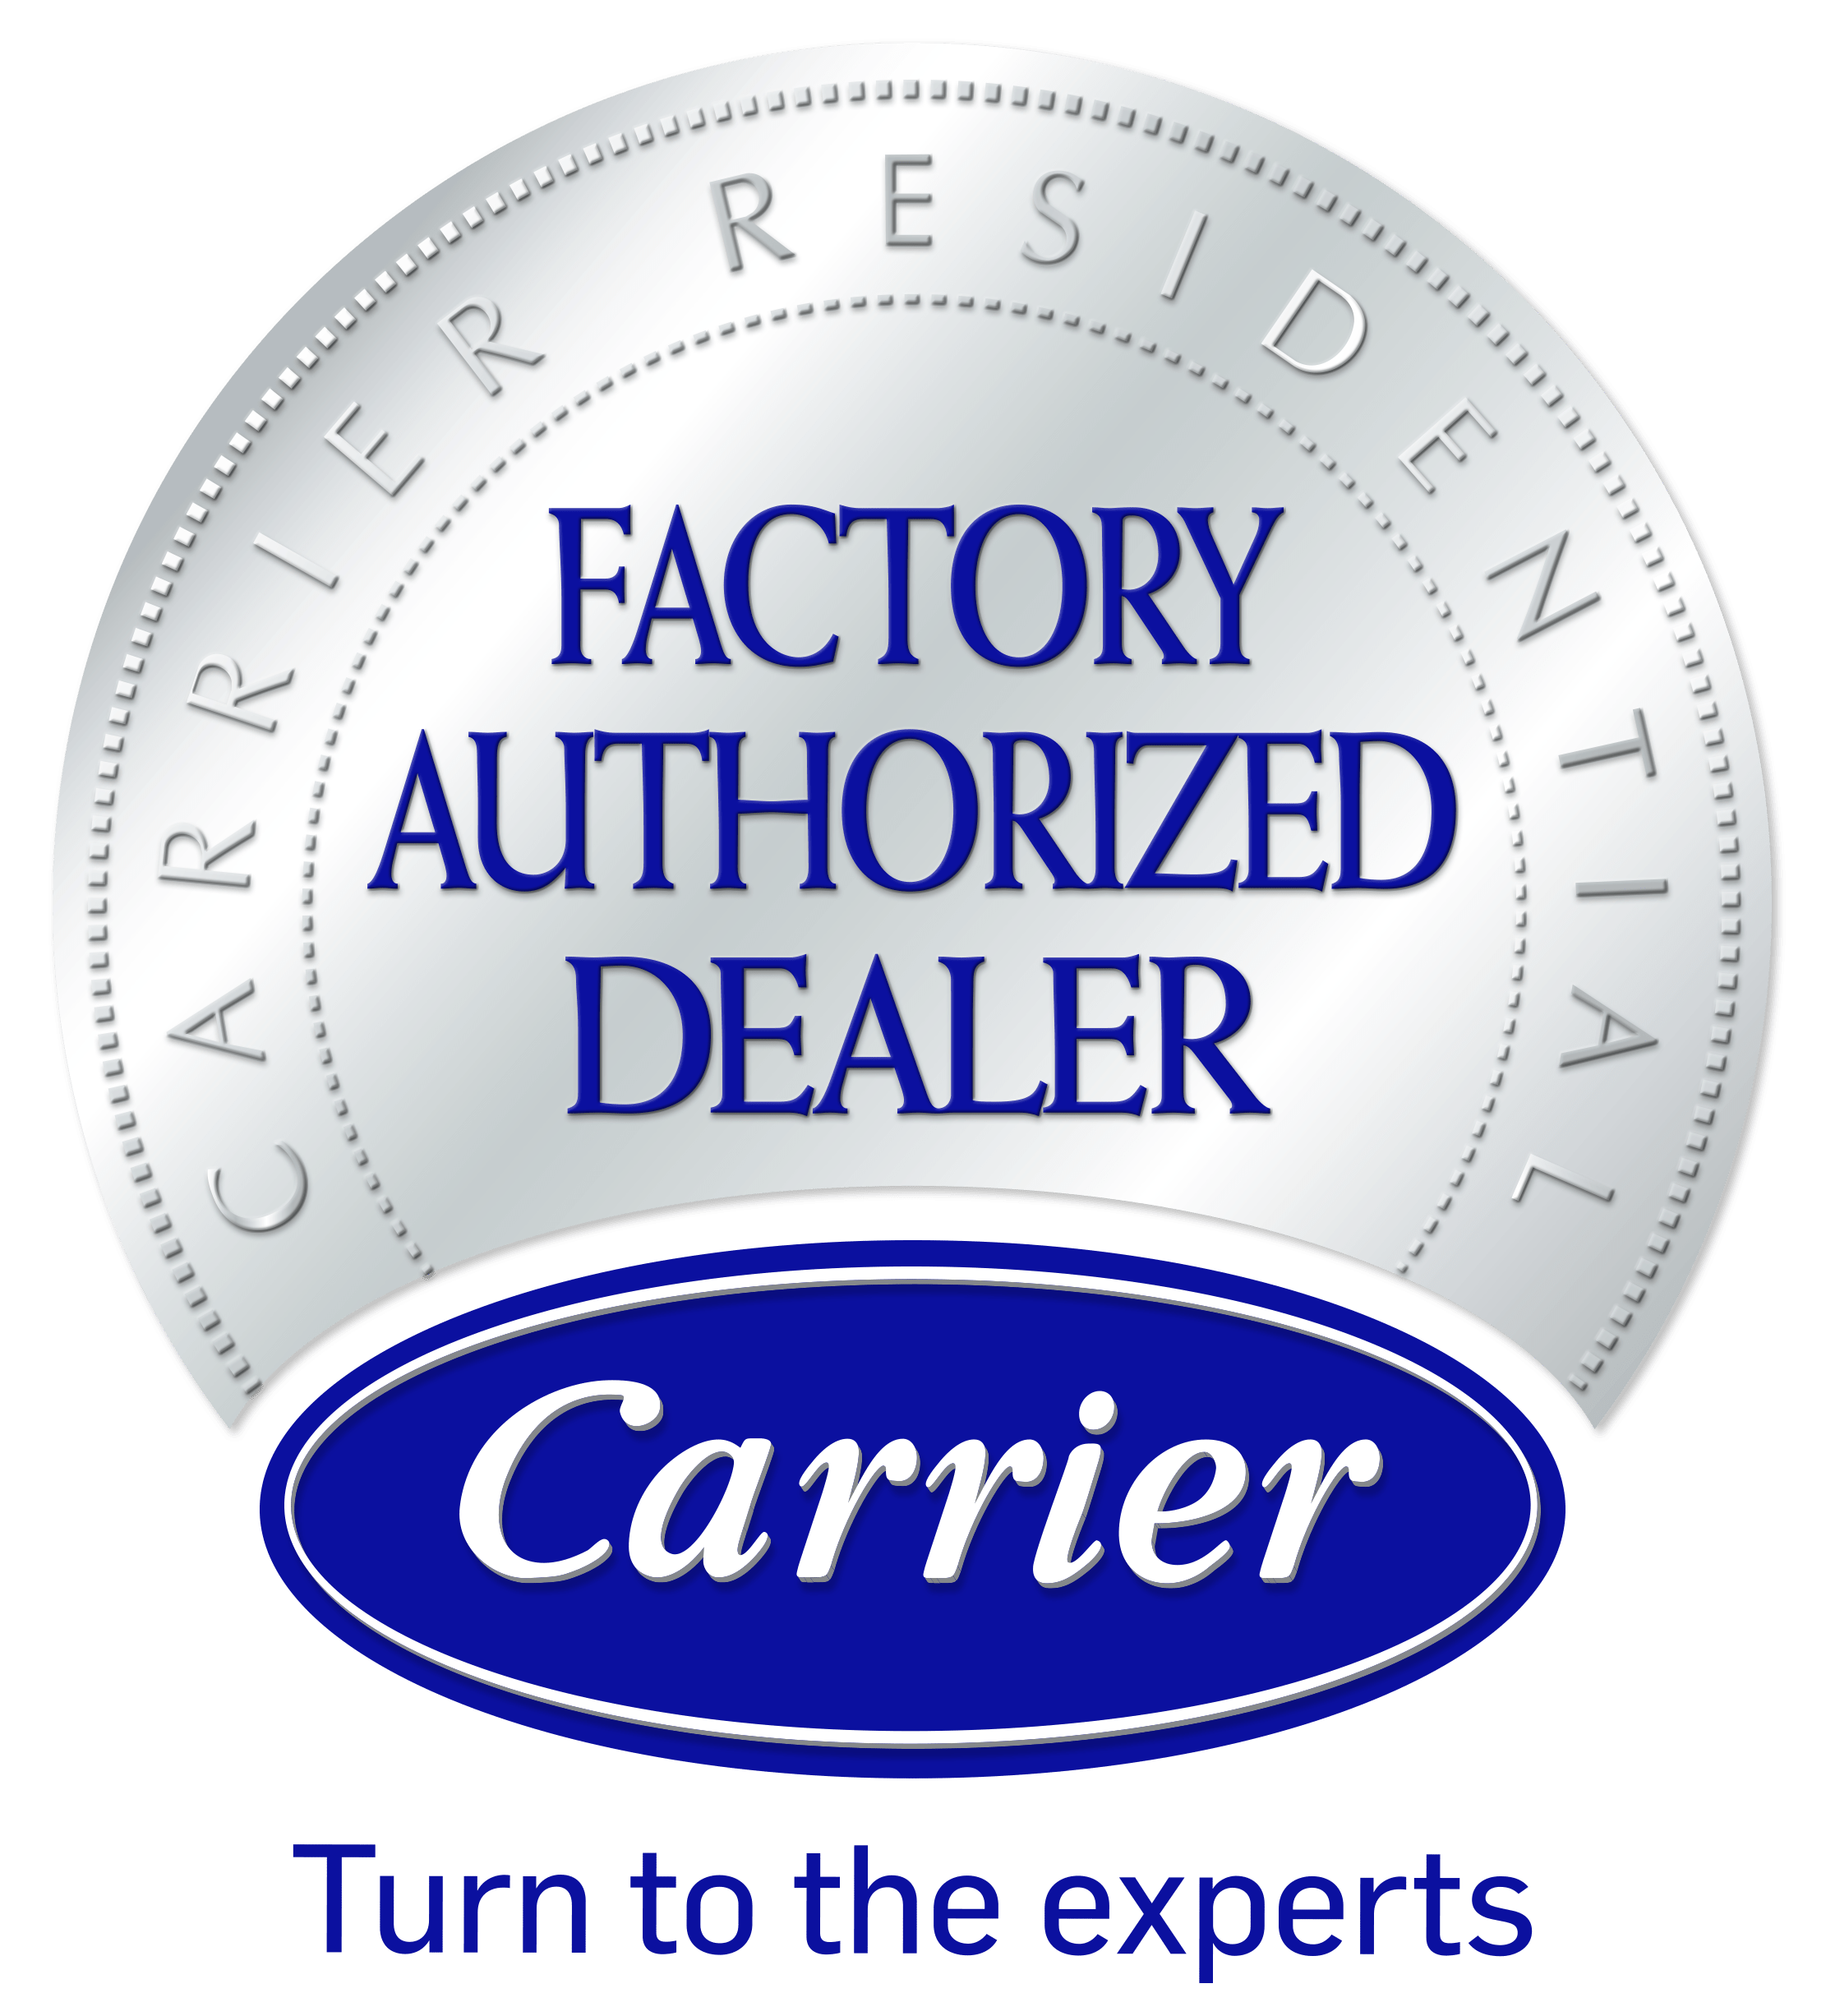 Carrier Factory Authorized Dealer seal